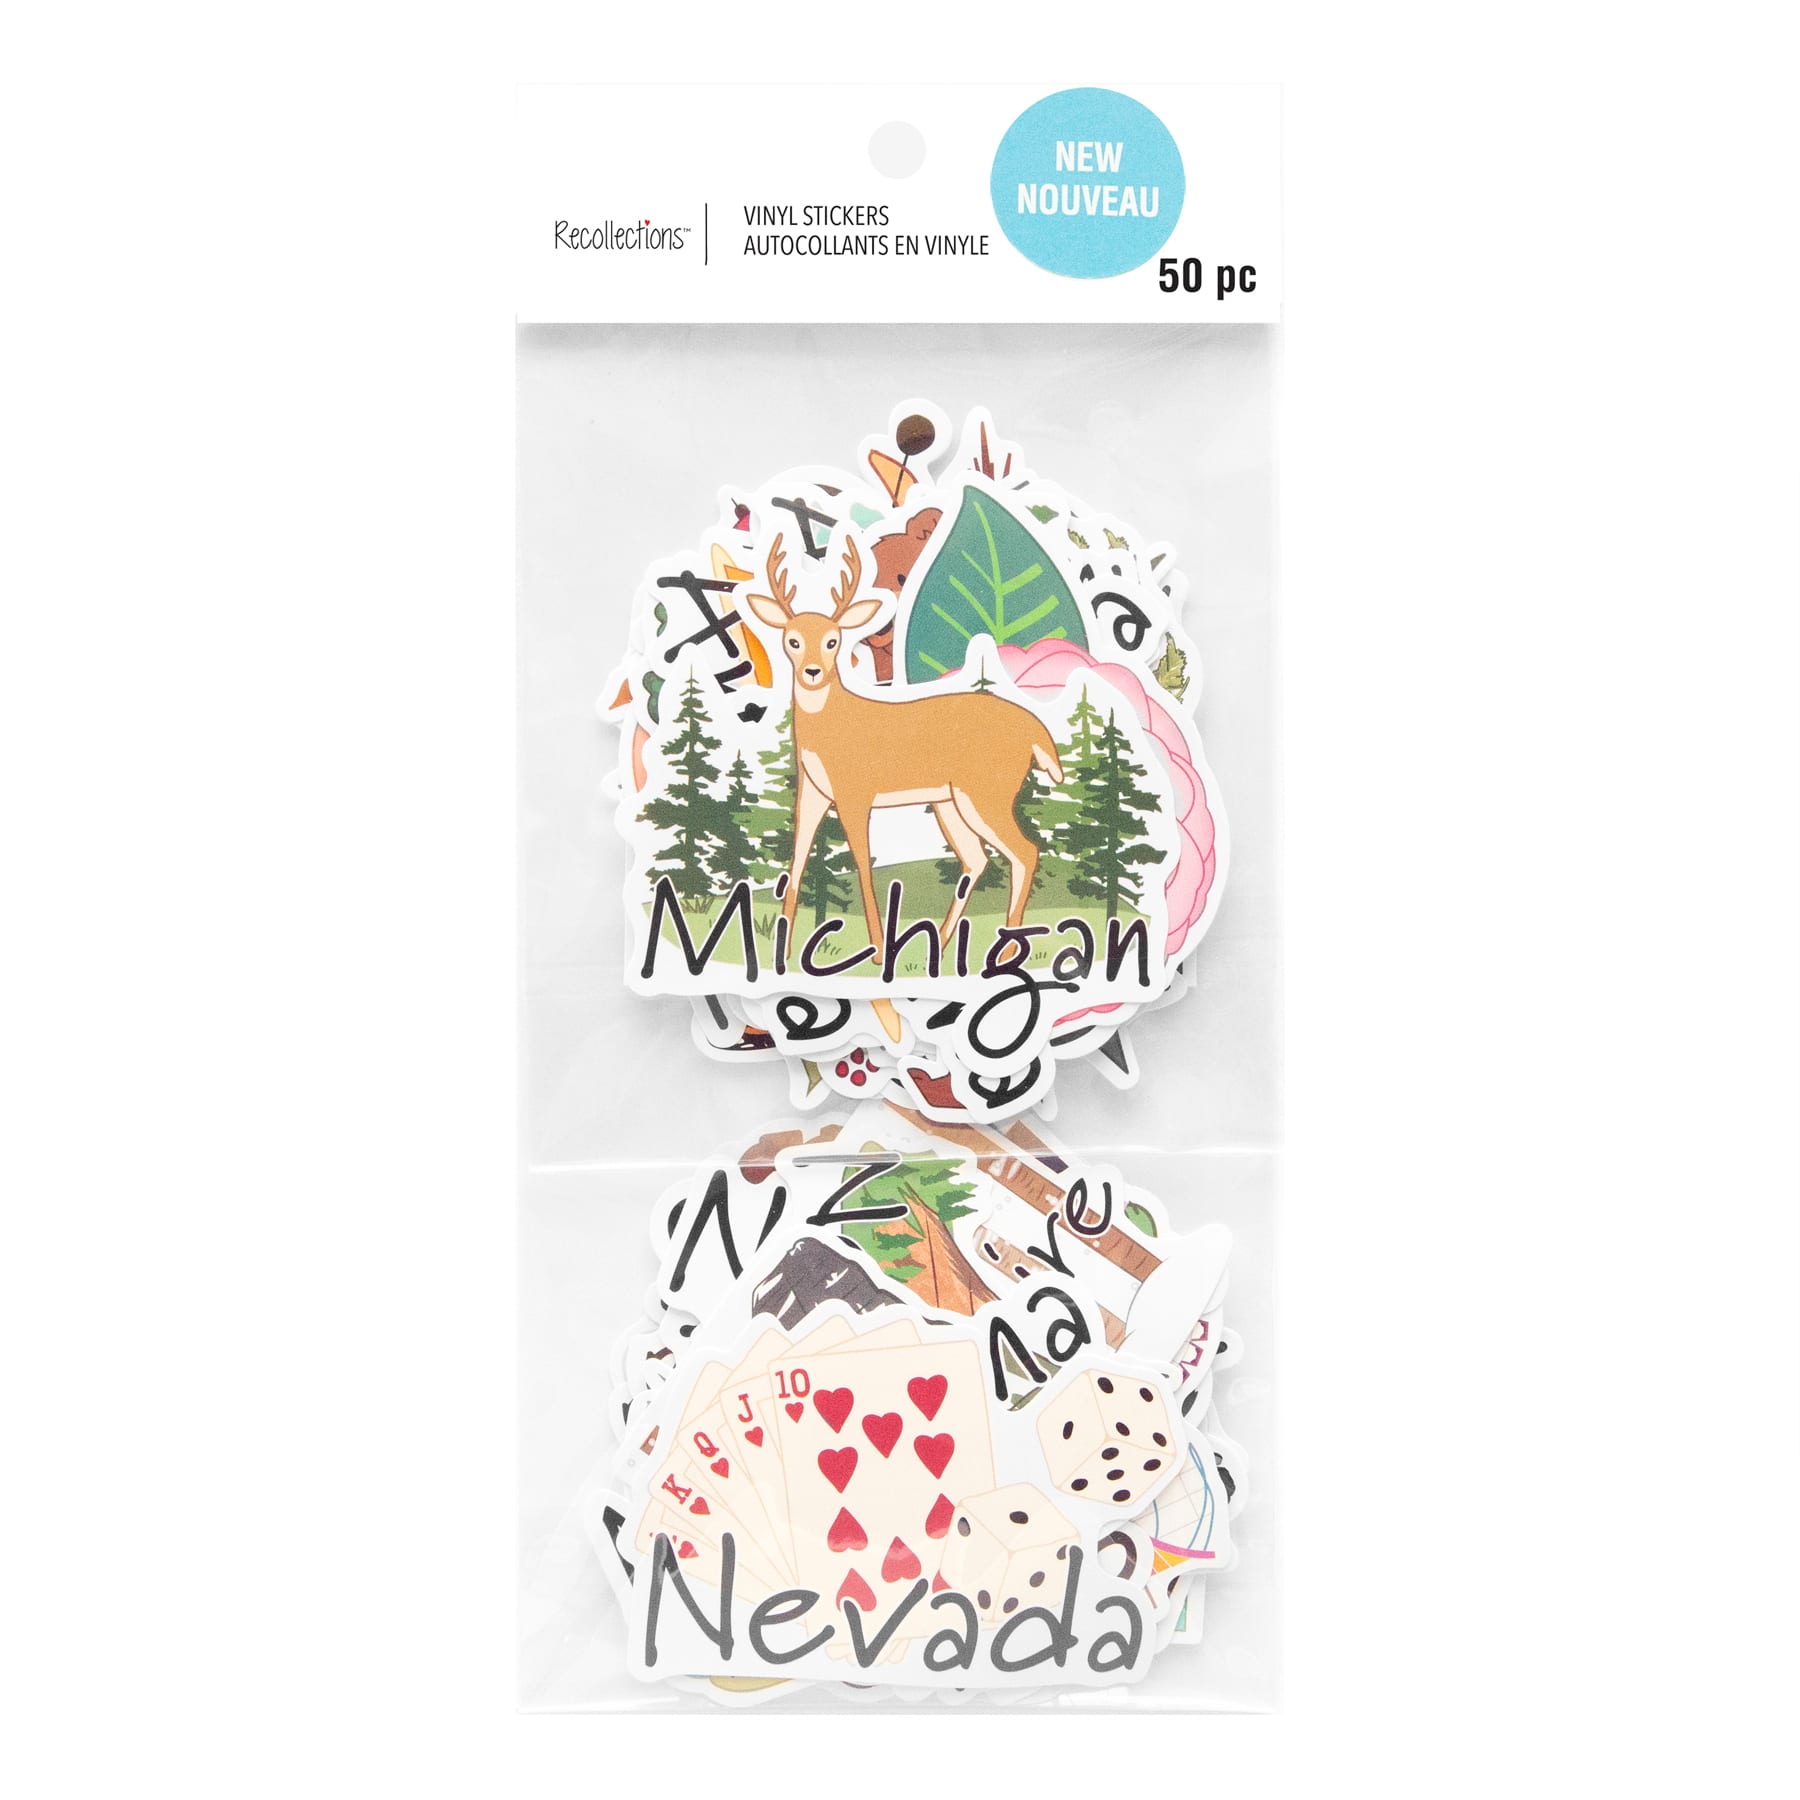 Recollections Christmas Sticker - Each